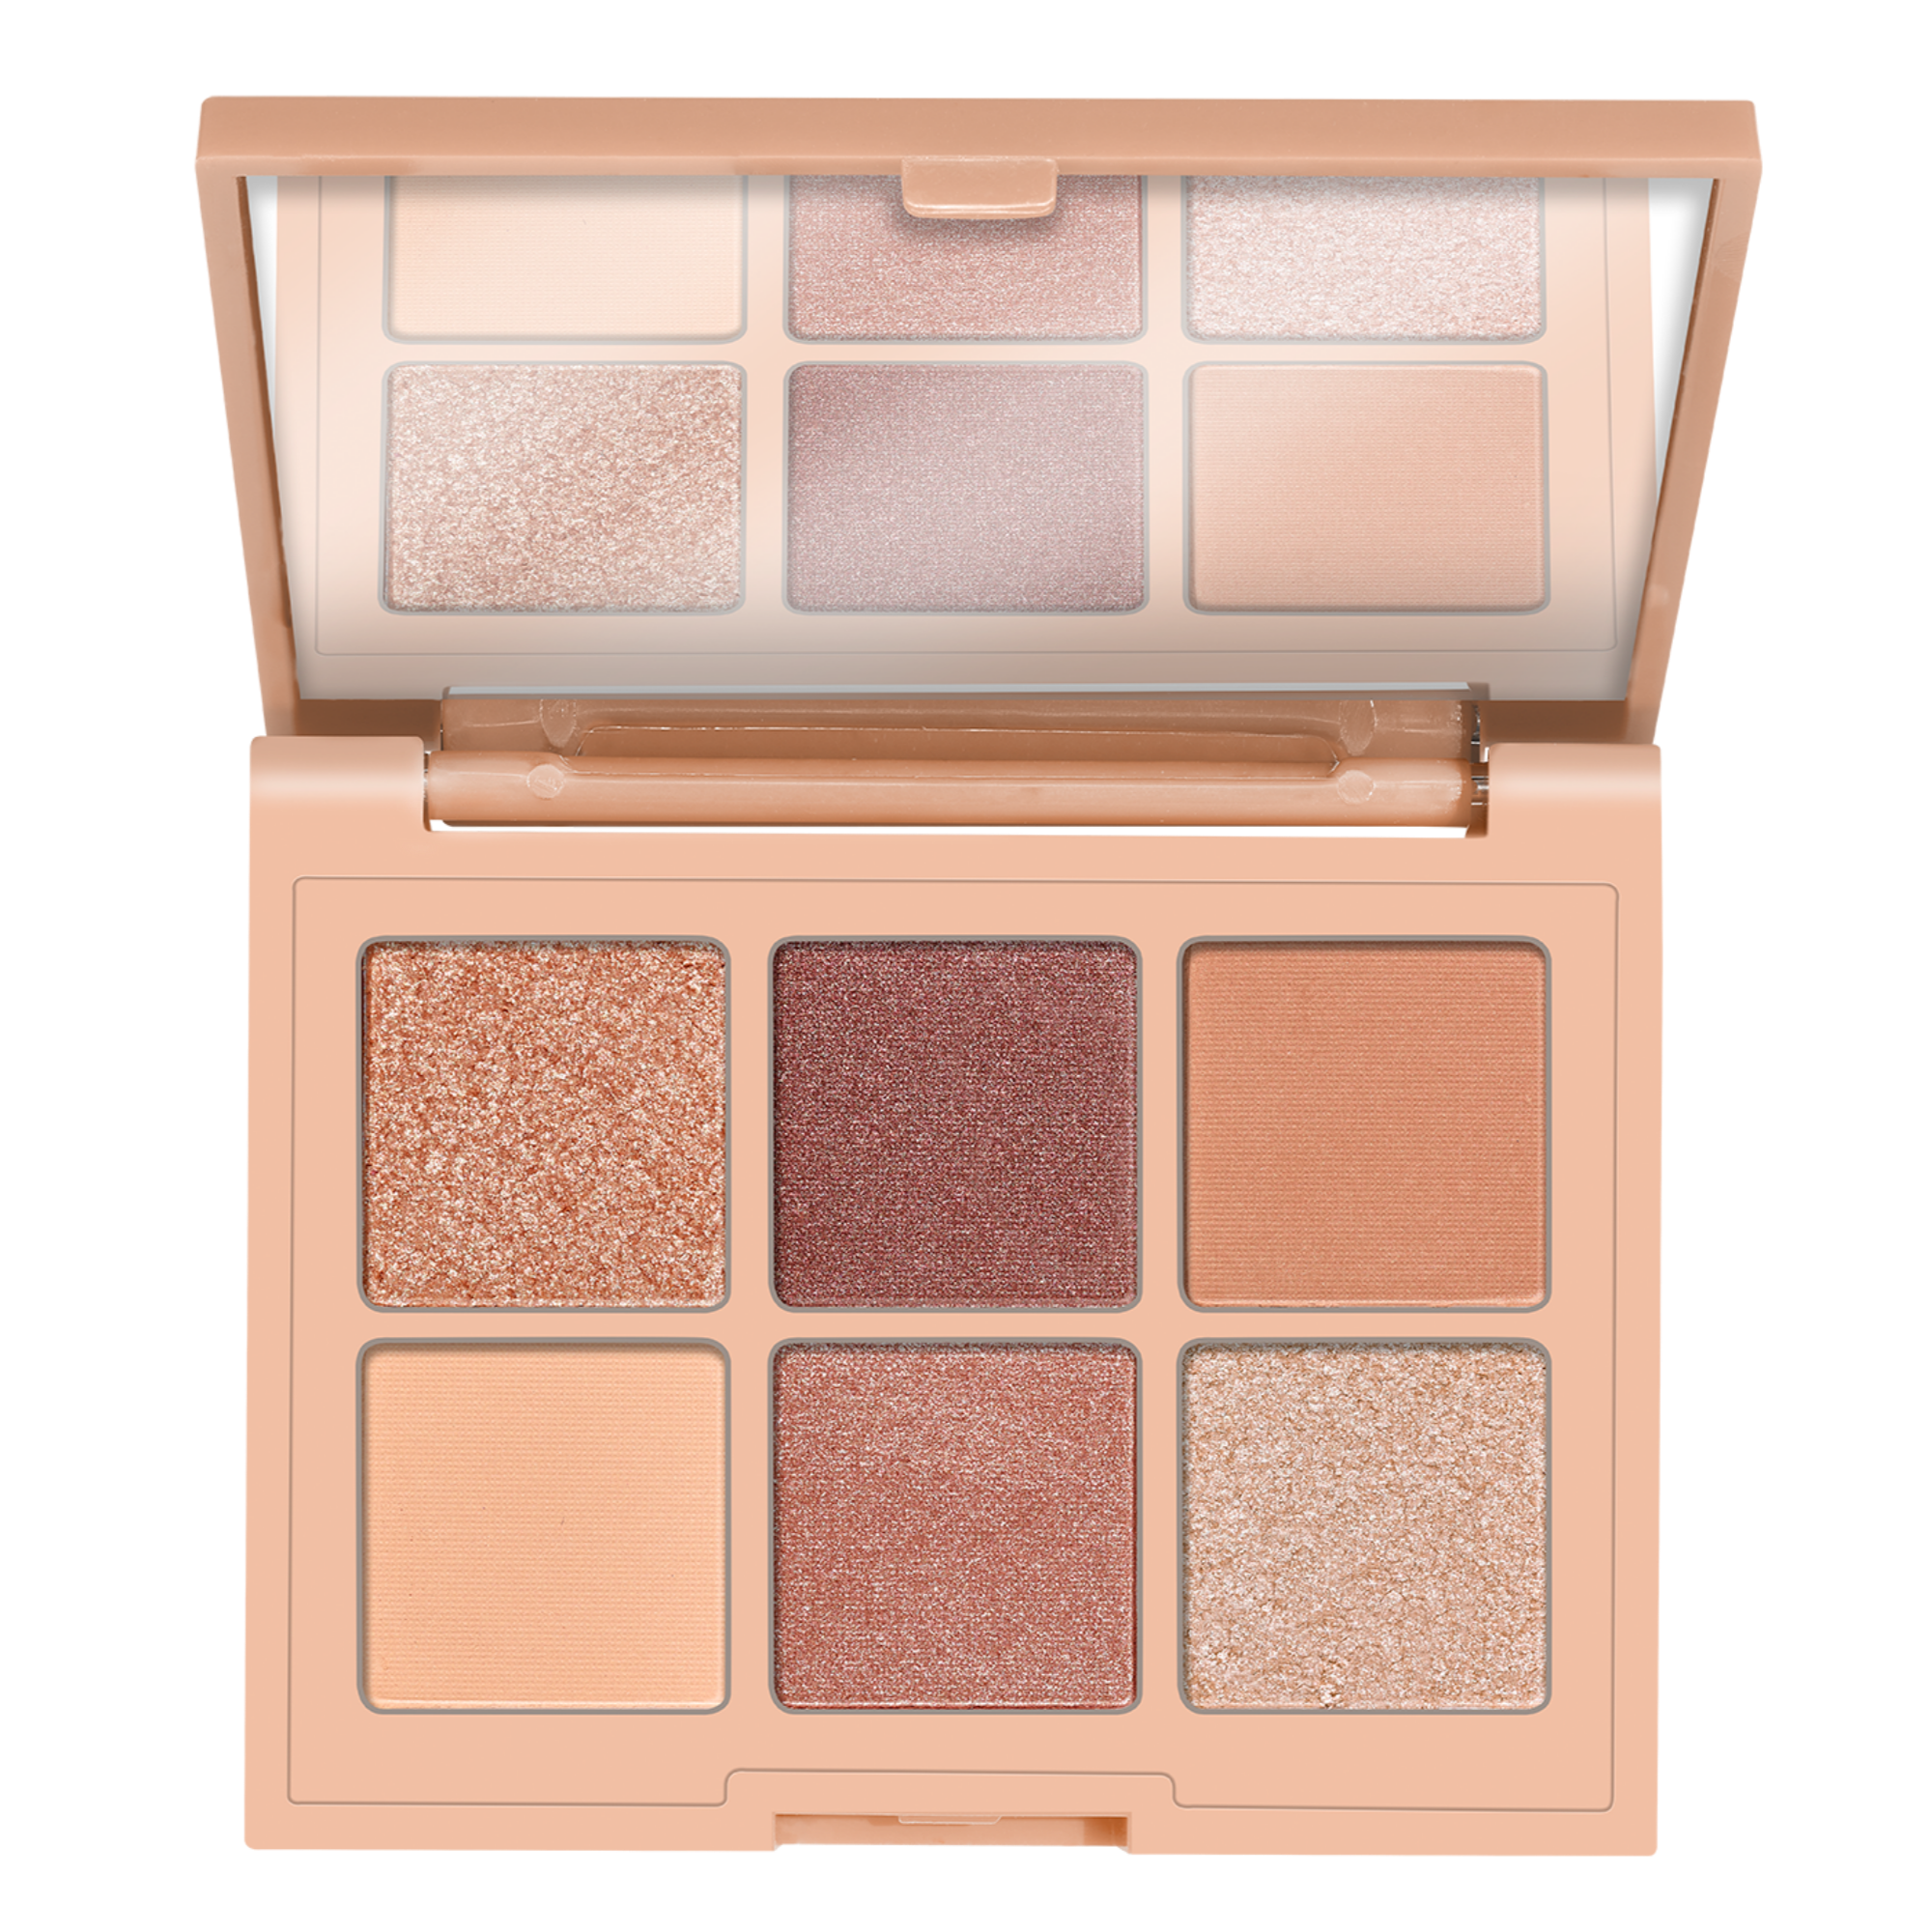 nothing compares to NUDE eyeshadow palette